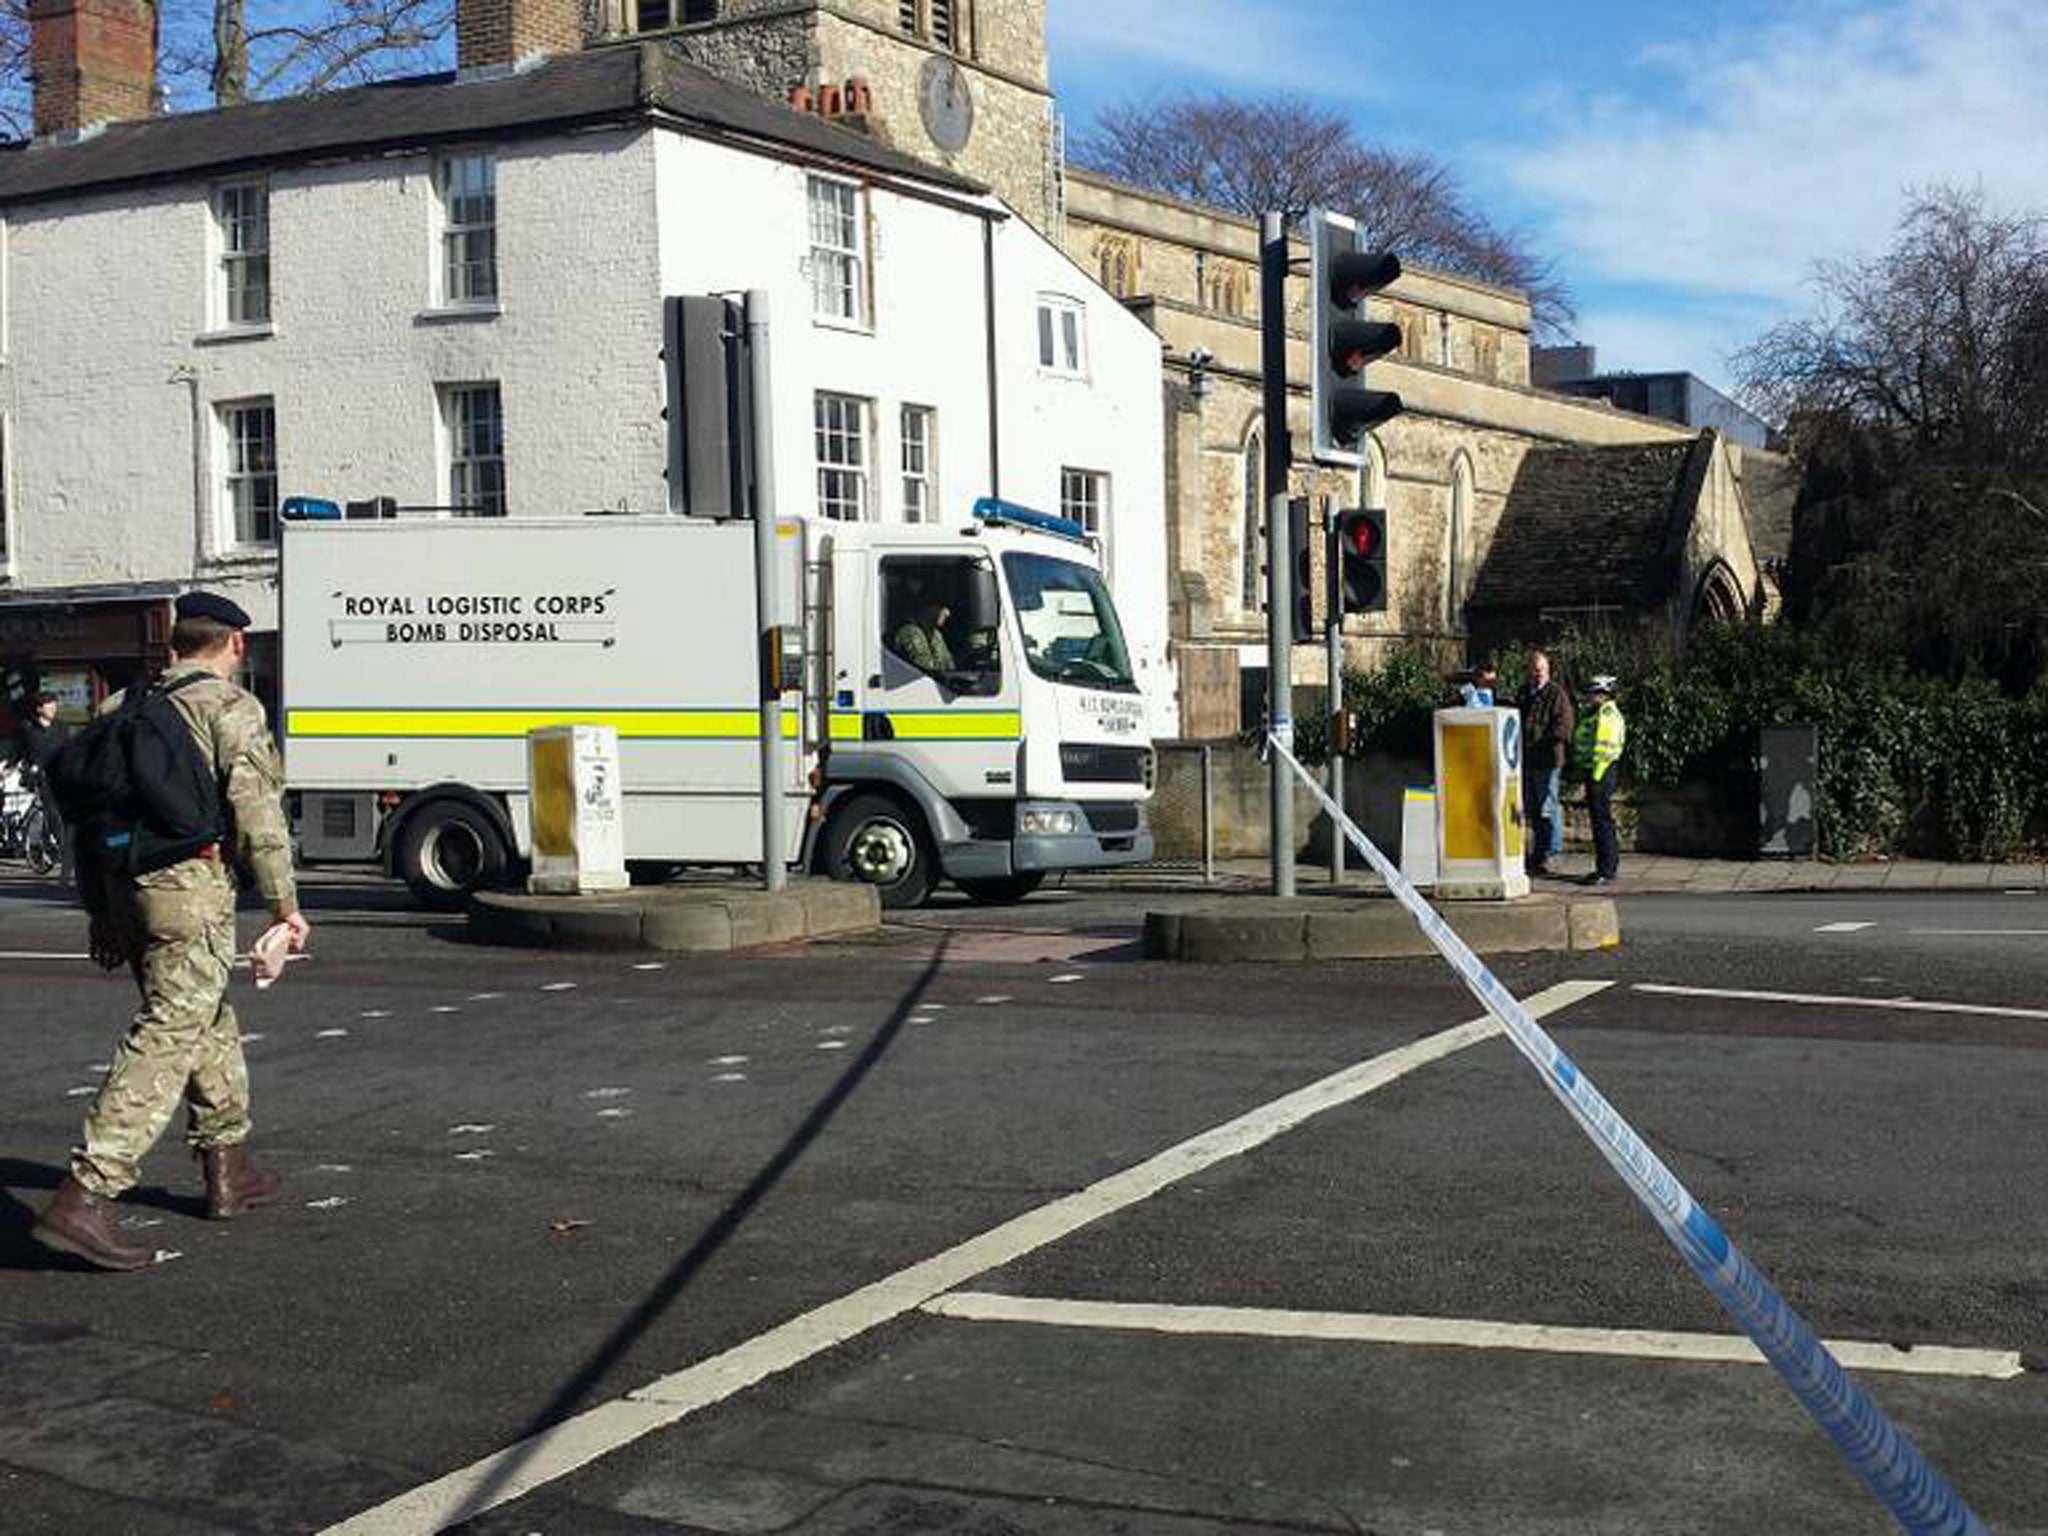 A bomb disposal unit deployed to investigate one of the 'suspicious packages' in Oxford, which the Ministry of Defence said was routine procedure